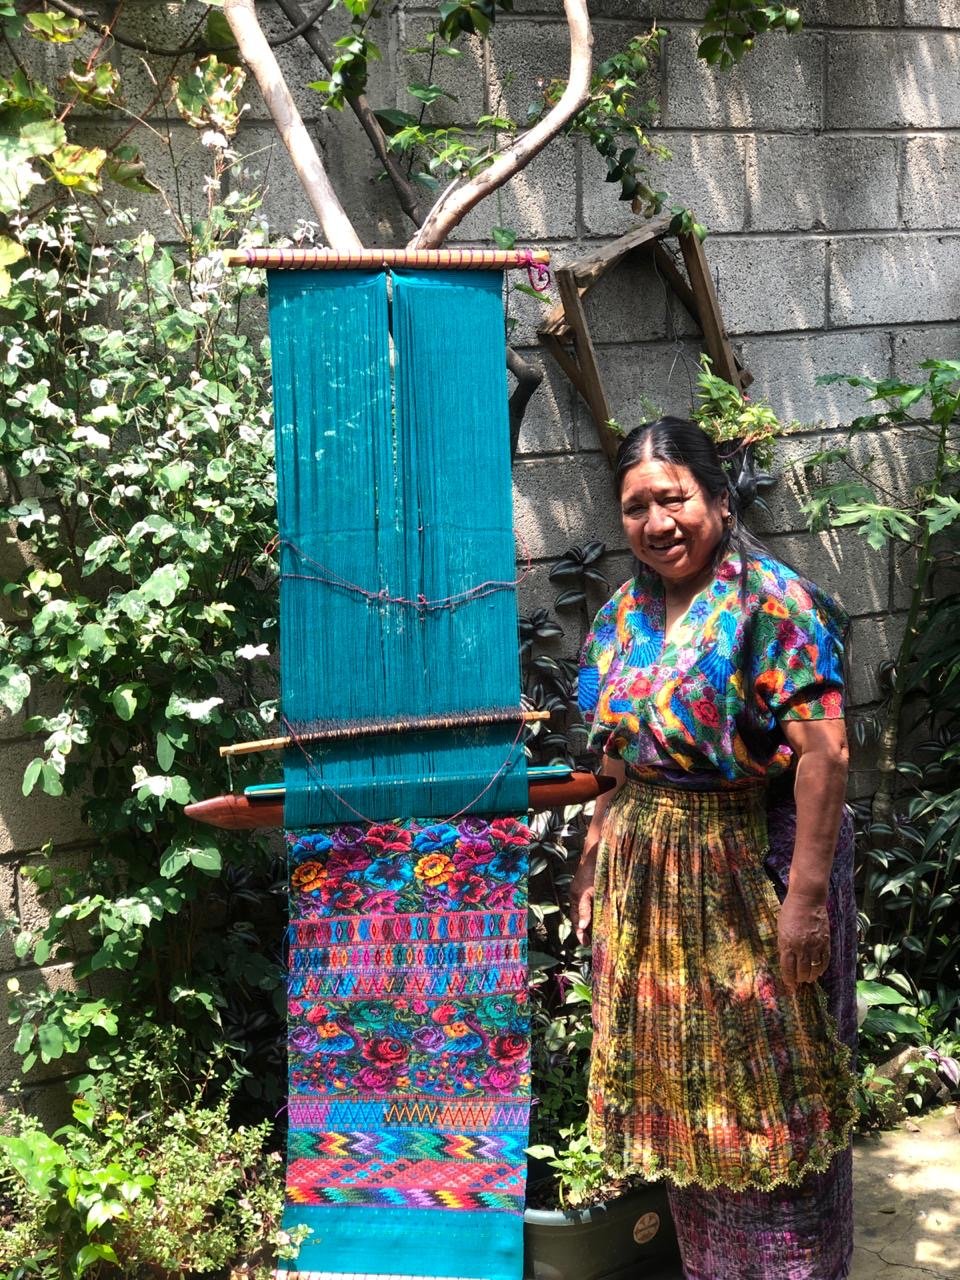 Learn about Guatemalan textiles from Doña Lidia! / TBD